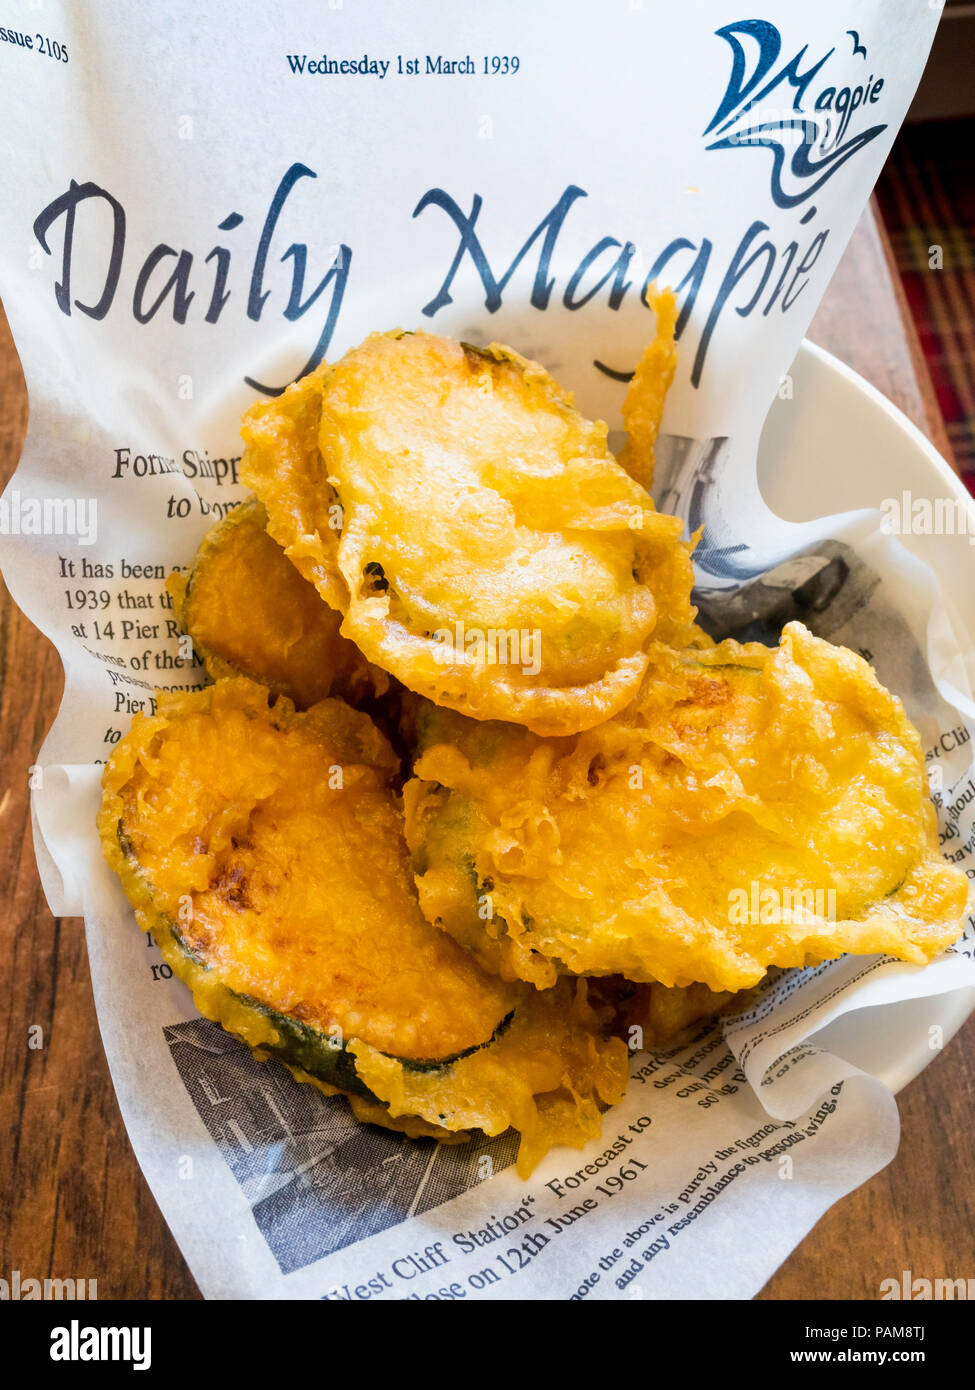 Magpie Café Whitby side dish of courgette slices fried in batter Stock Photo